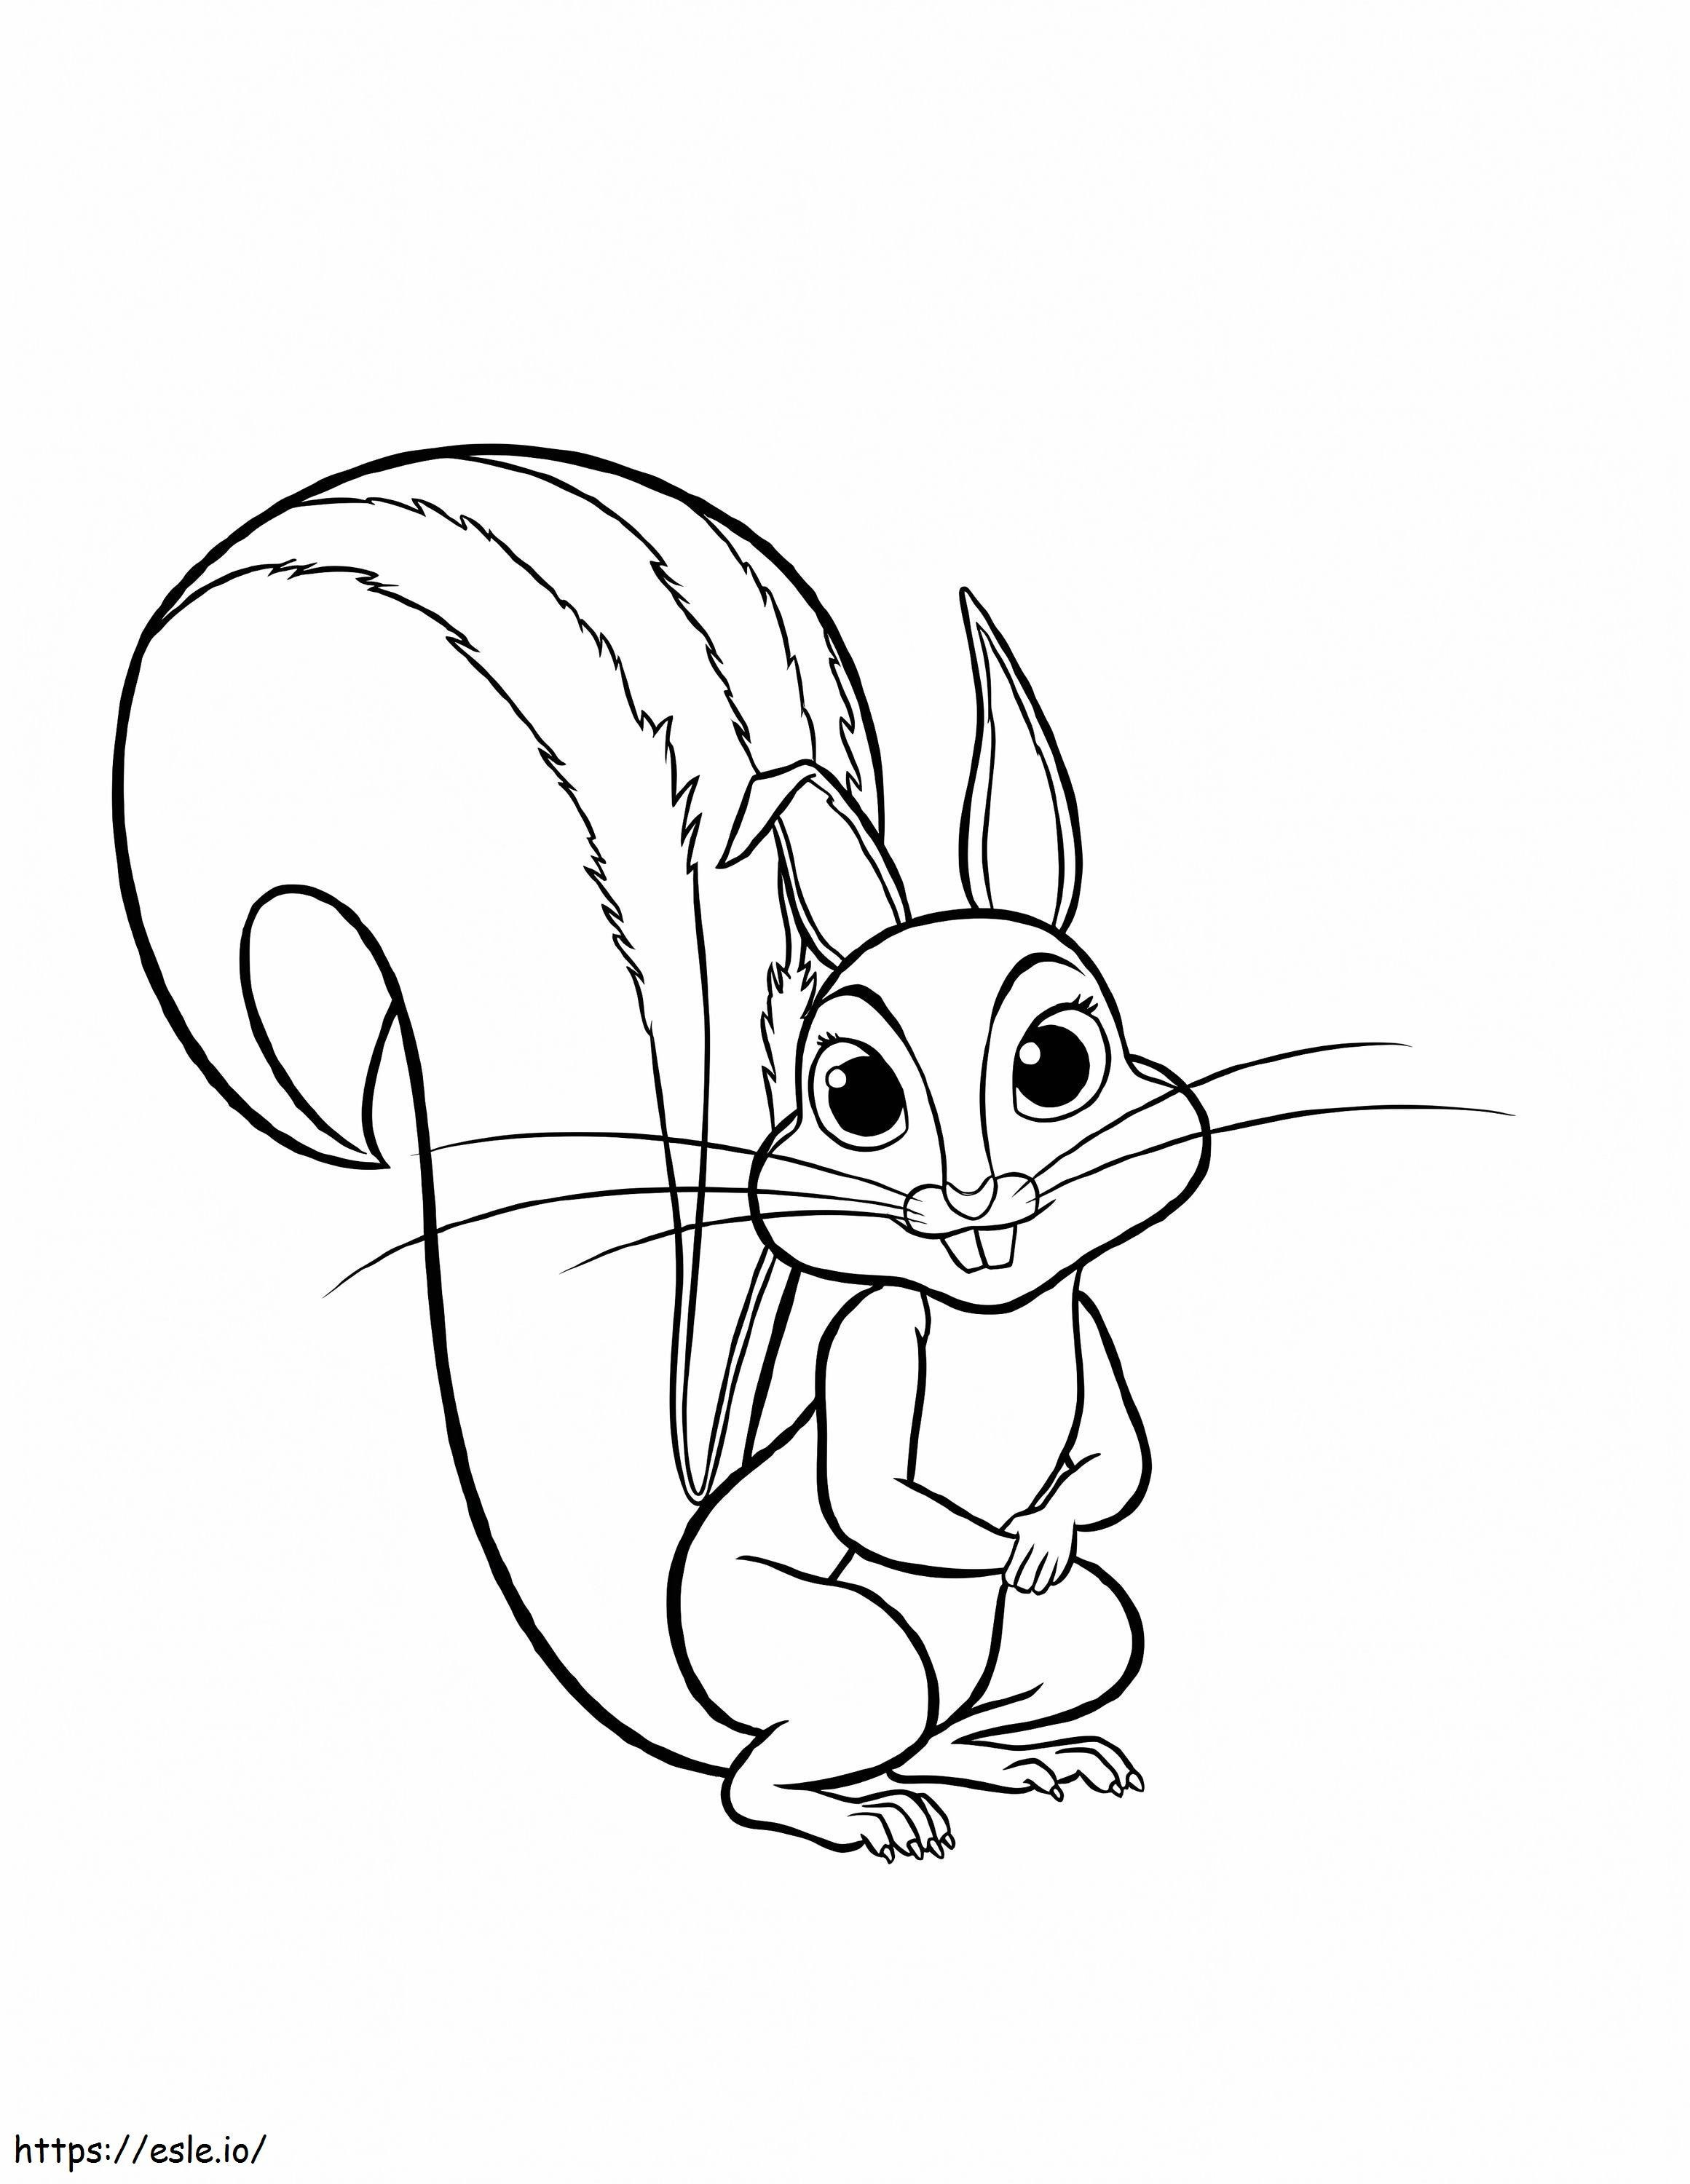 1550483940 Nut Source Xmk coloring page